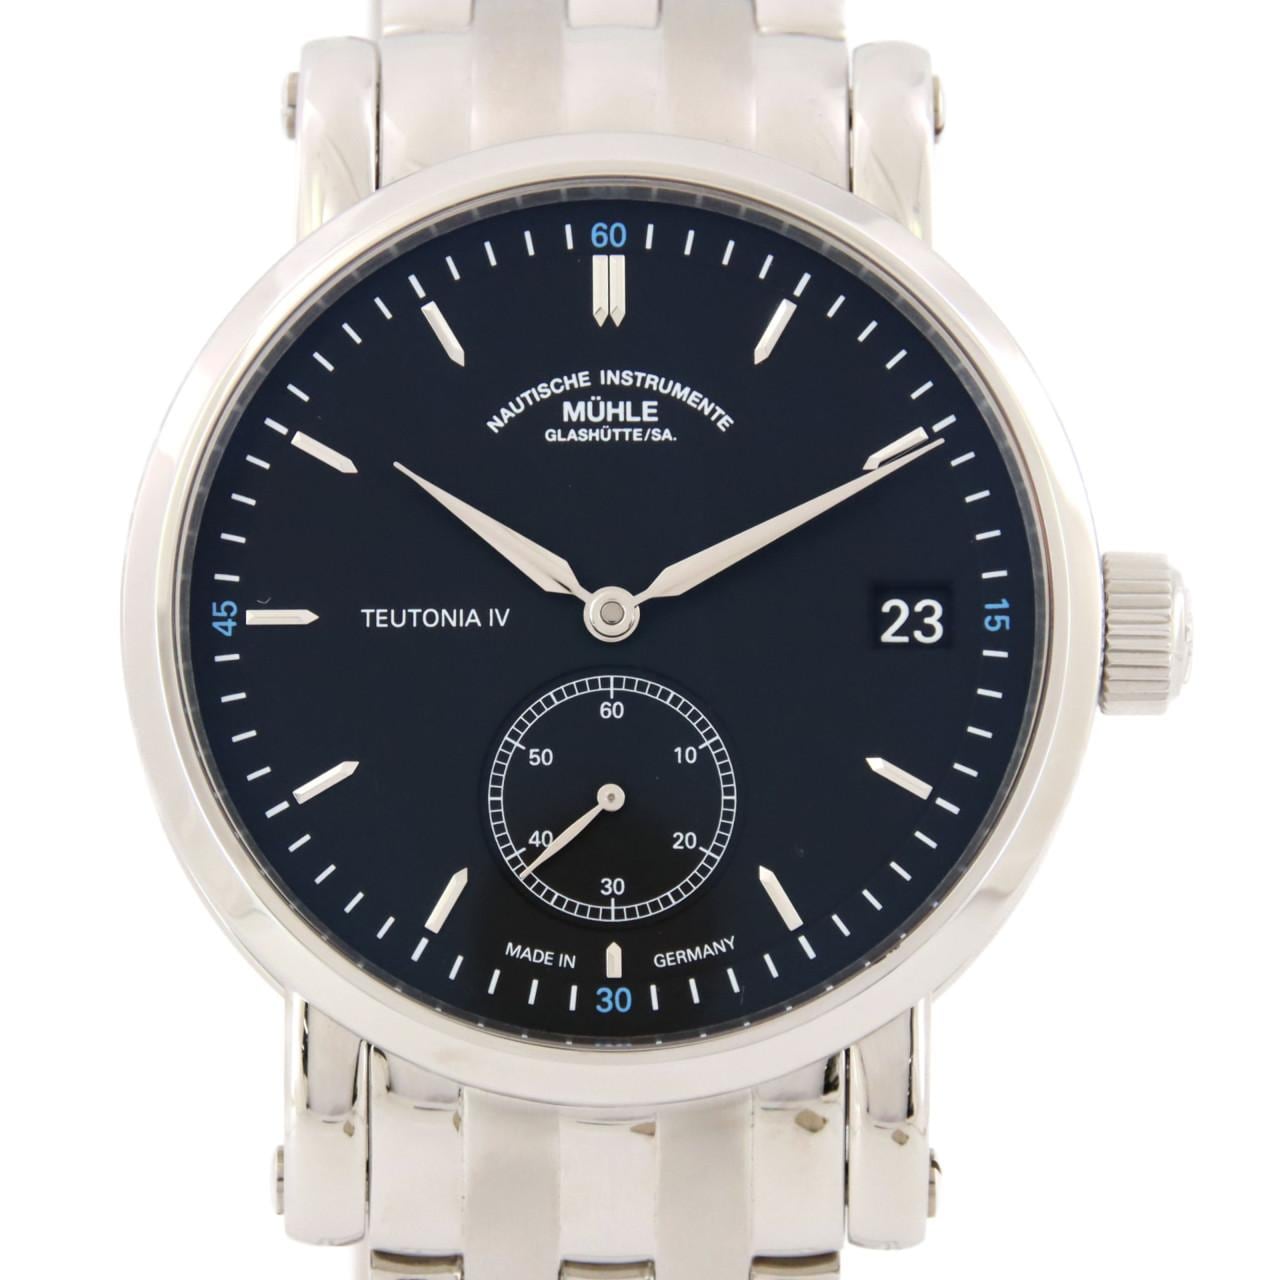 [BRAND NEW] MUHLE GLASHUTTE Totonia IV Small Second M1-44-43-MB SS Automatic